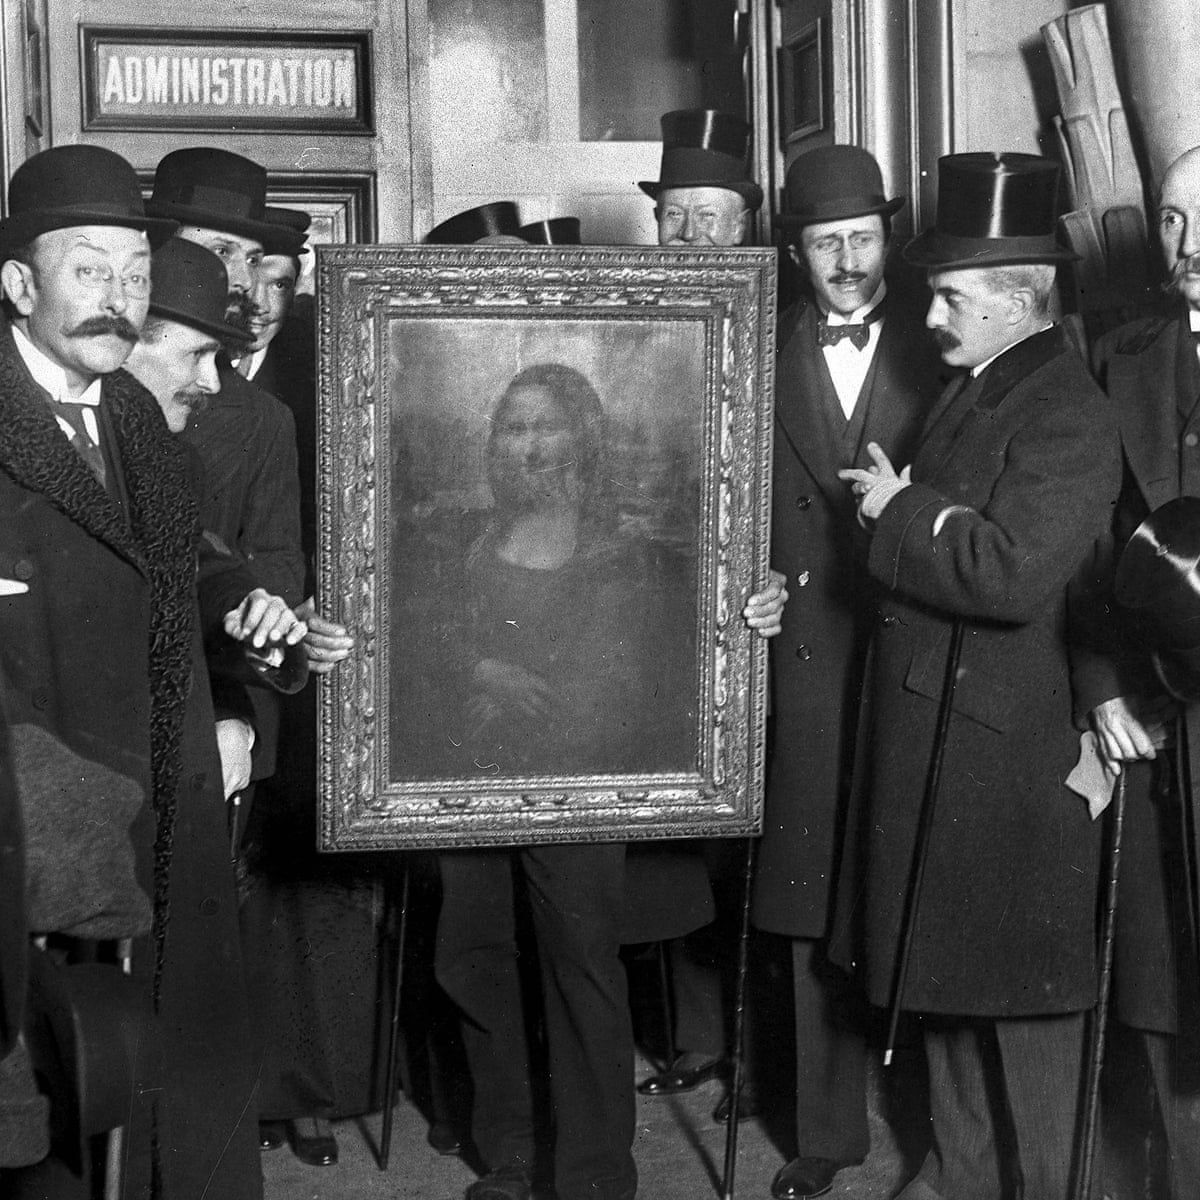 Archive, 23 August 1911: Mona Lisa stolen from Louvre | Art and ...